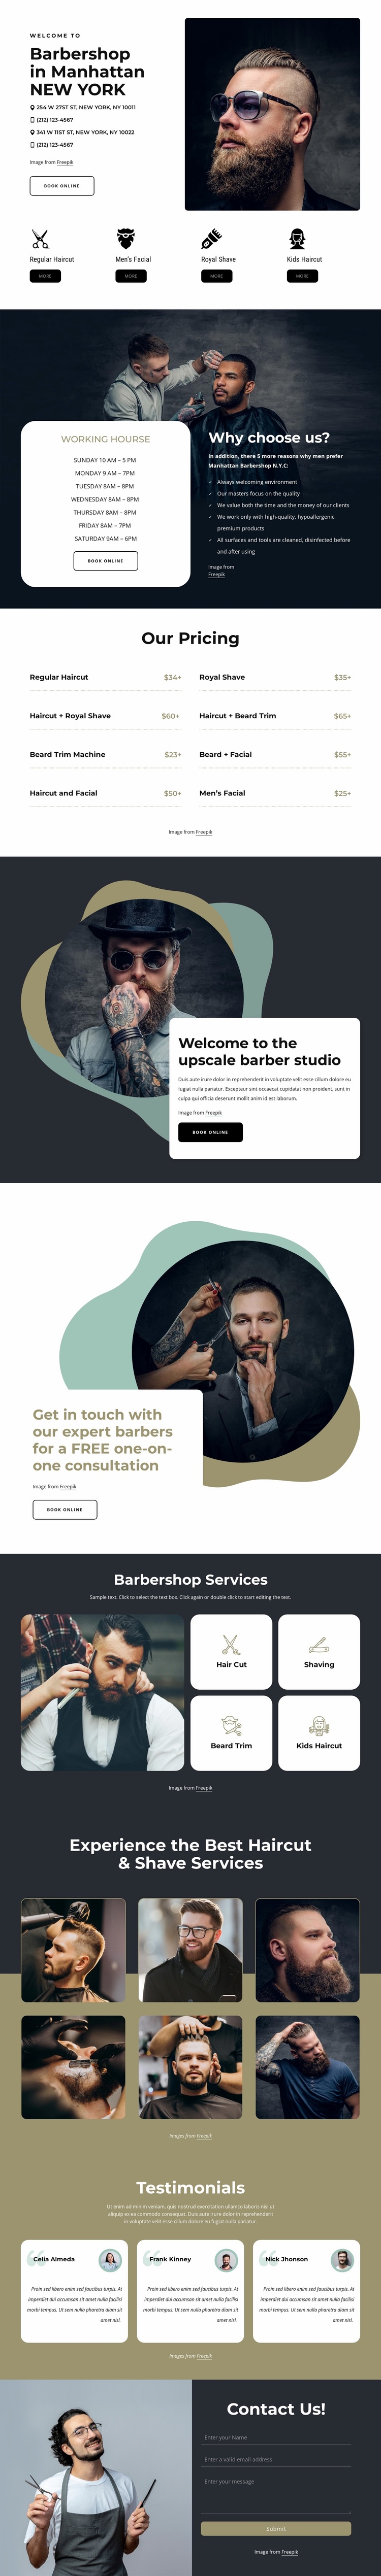 Hight quality grooming services Website Template